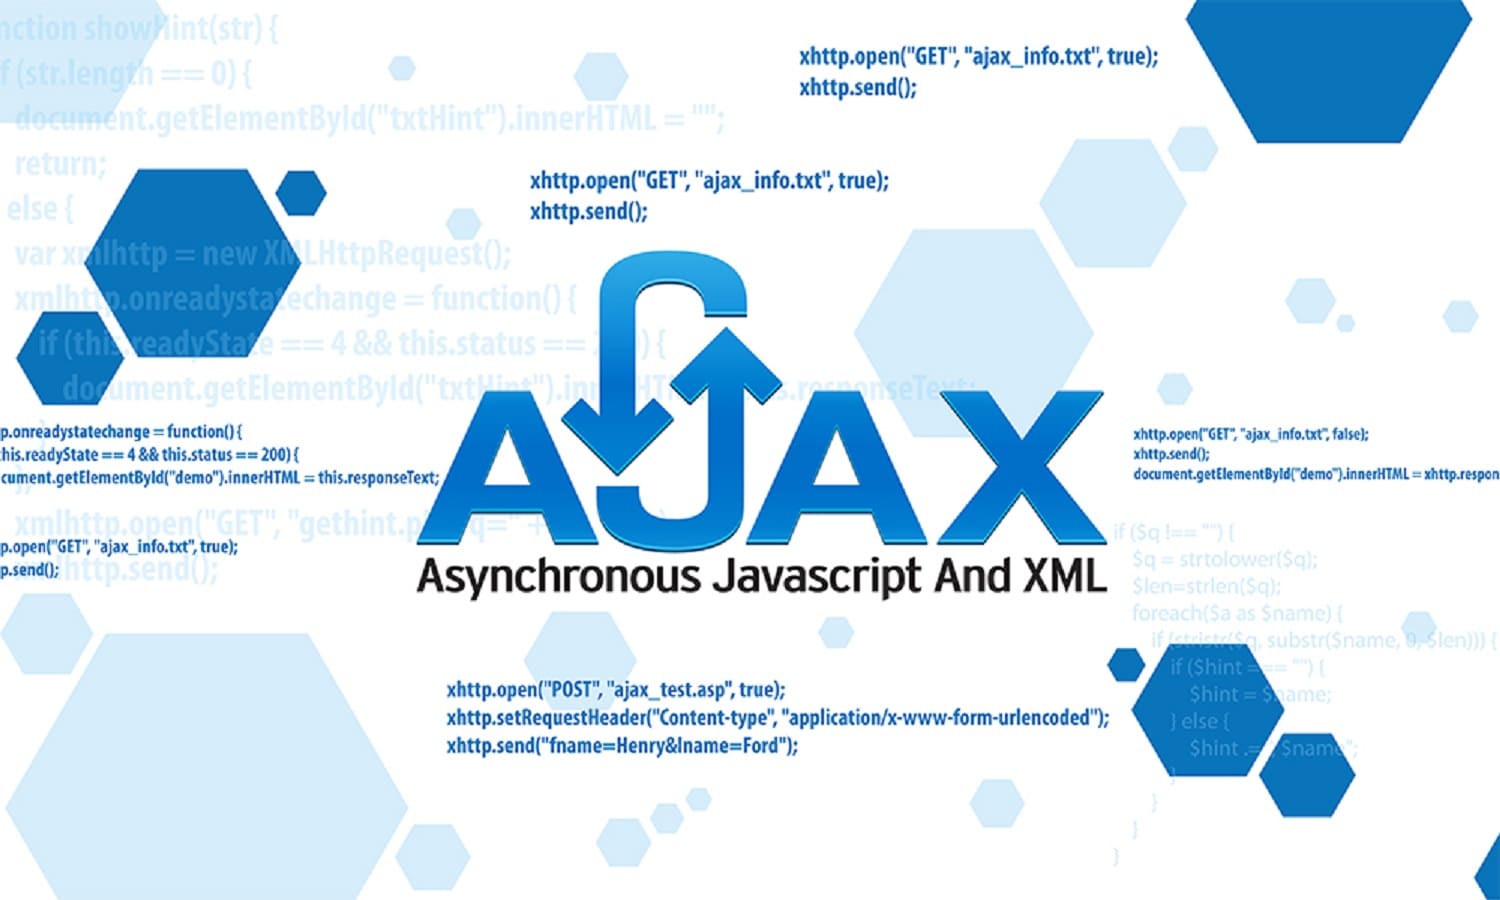 ajax_development_BSIT_Software_Services_Web_And_App_Development_Company_In_India